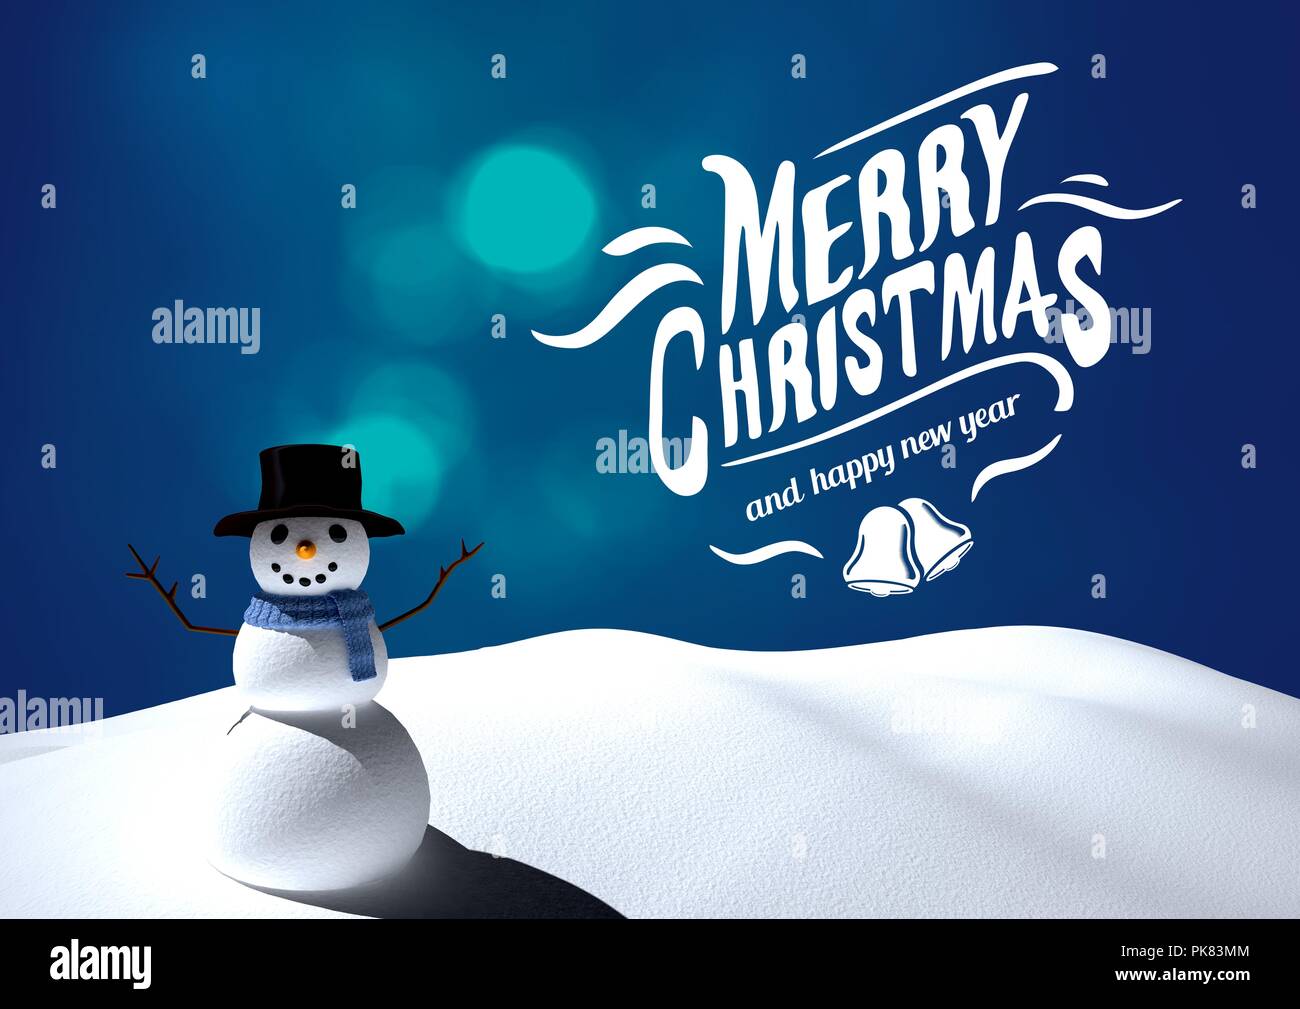 Merry Christmas text with snowman Stock Photo